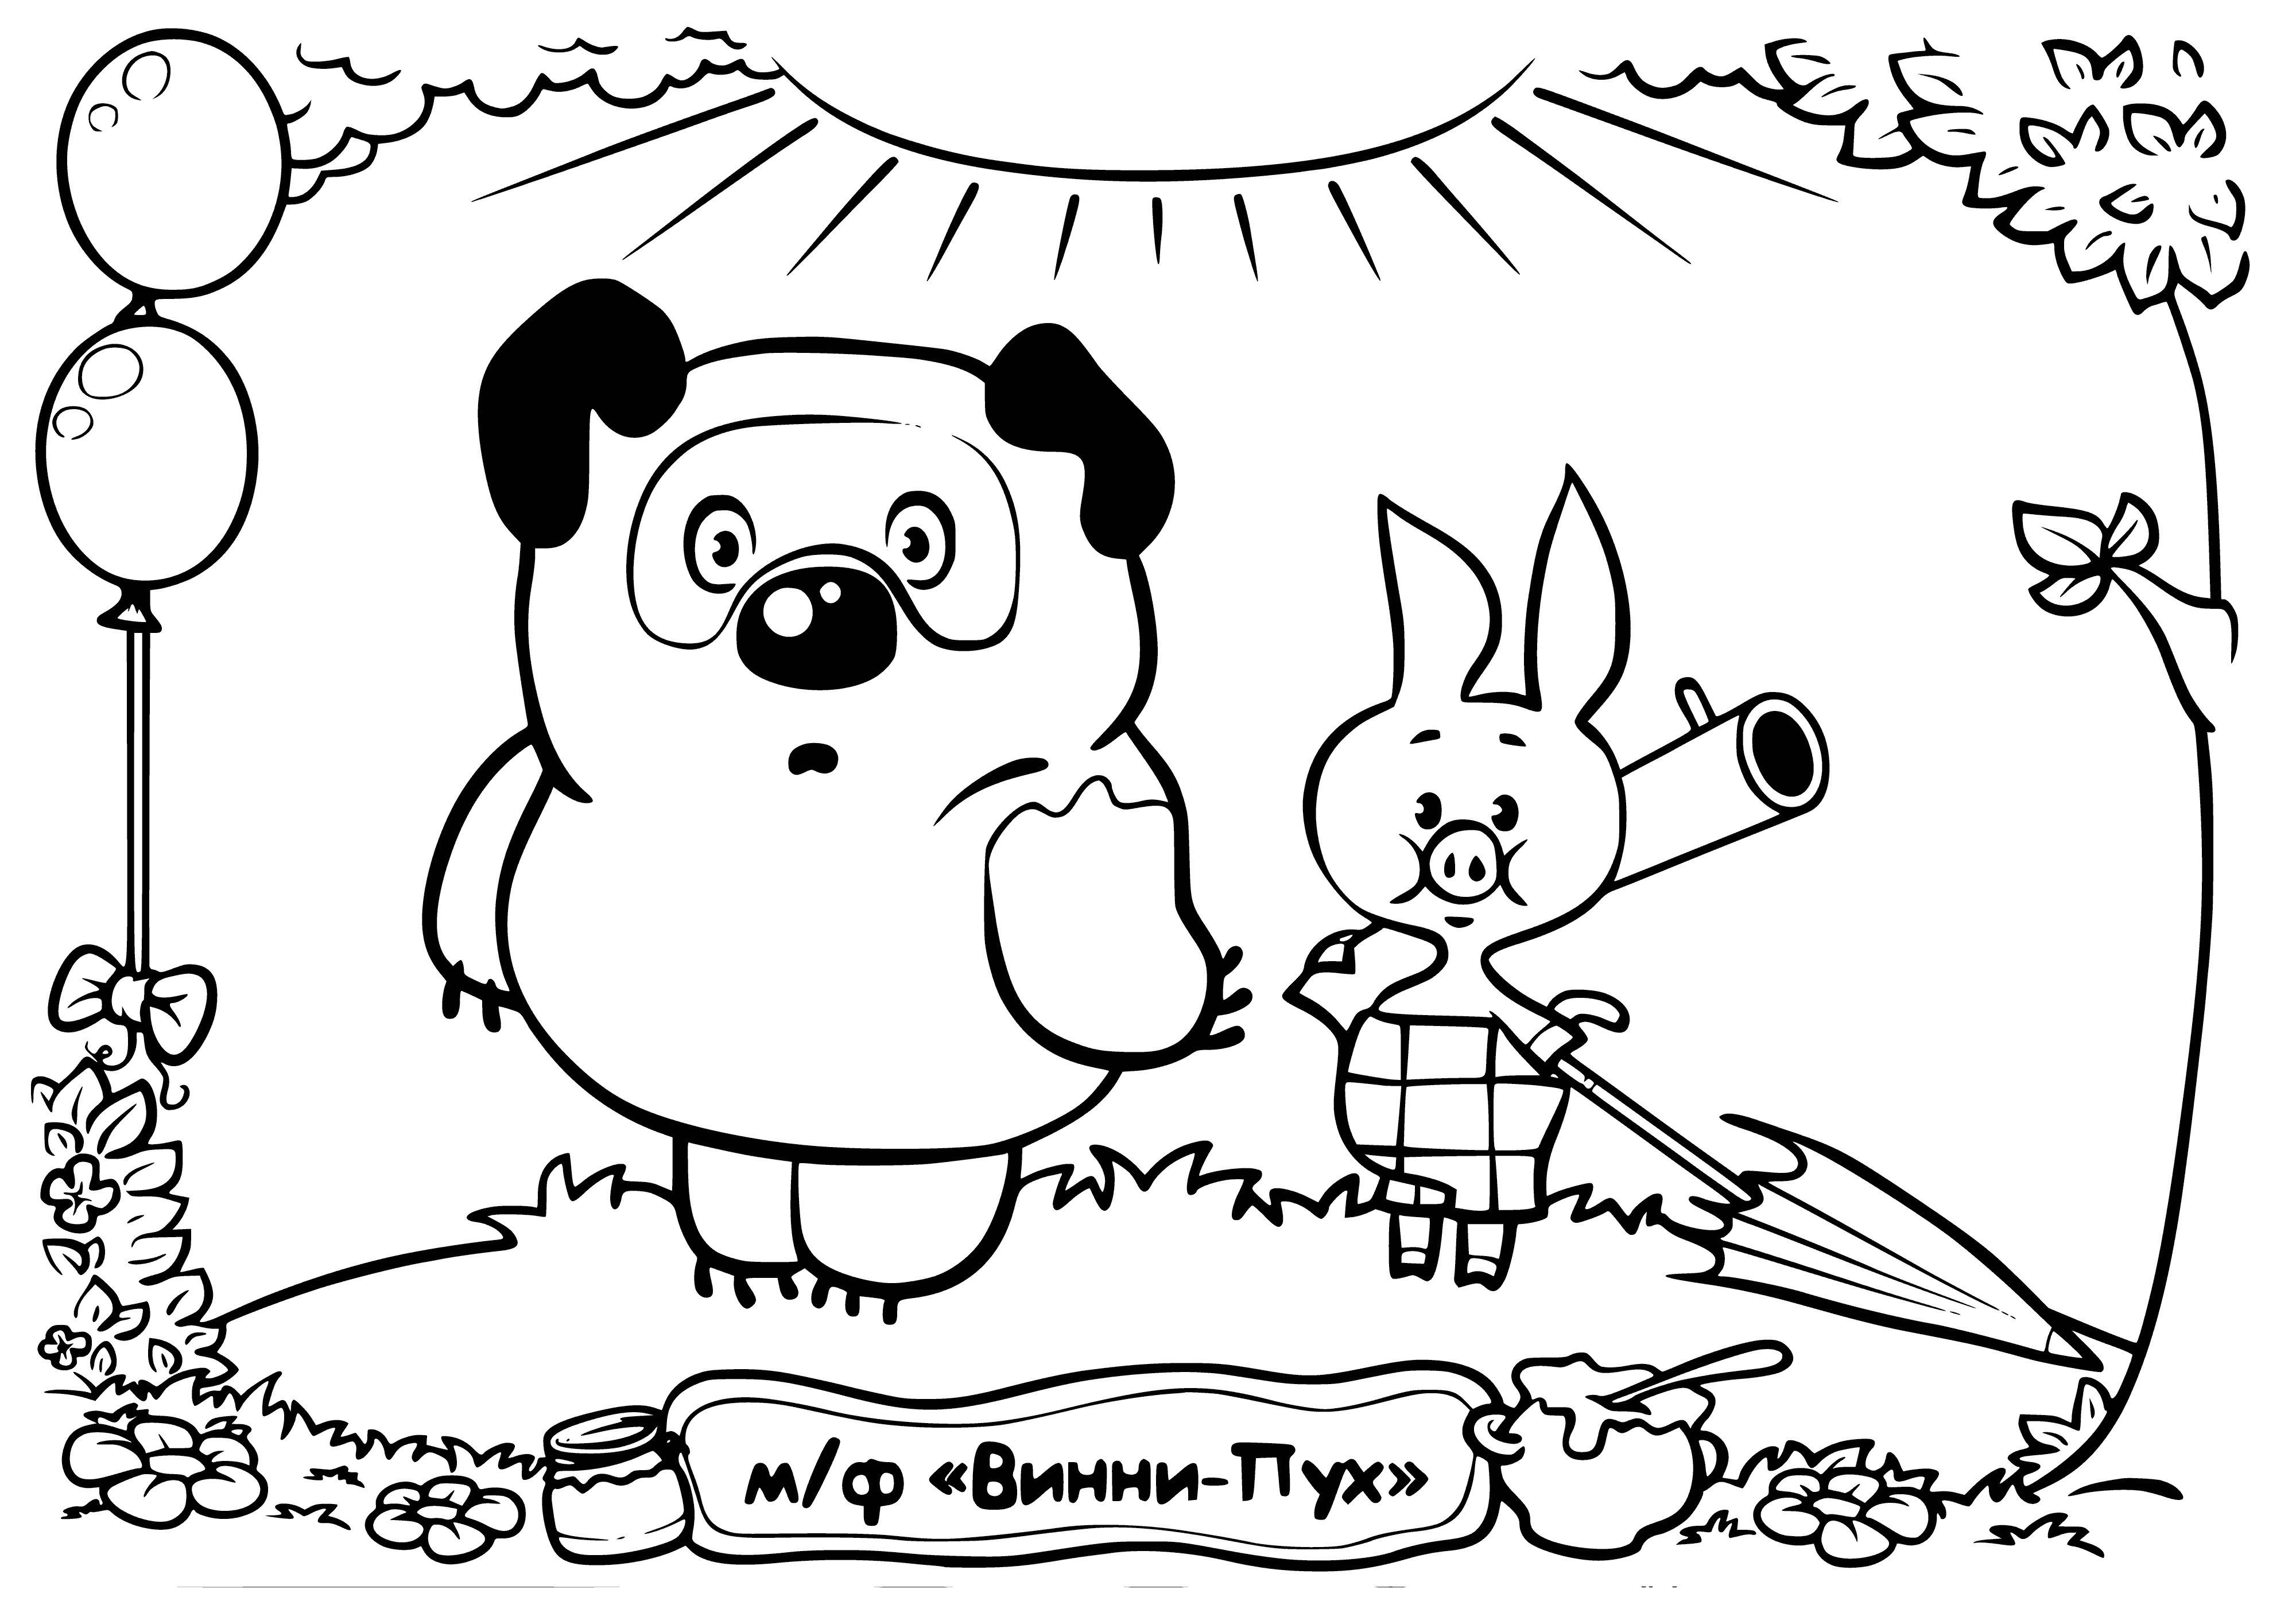 coloring page: Pooh & Piglet sit on a bench; Pooh holds a balloon, Piglet looks at the ground.